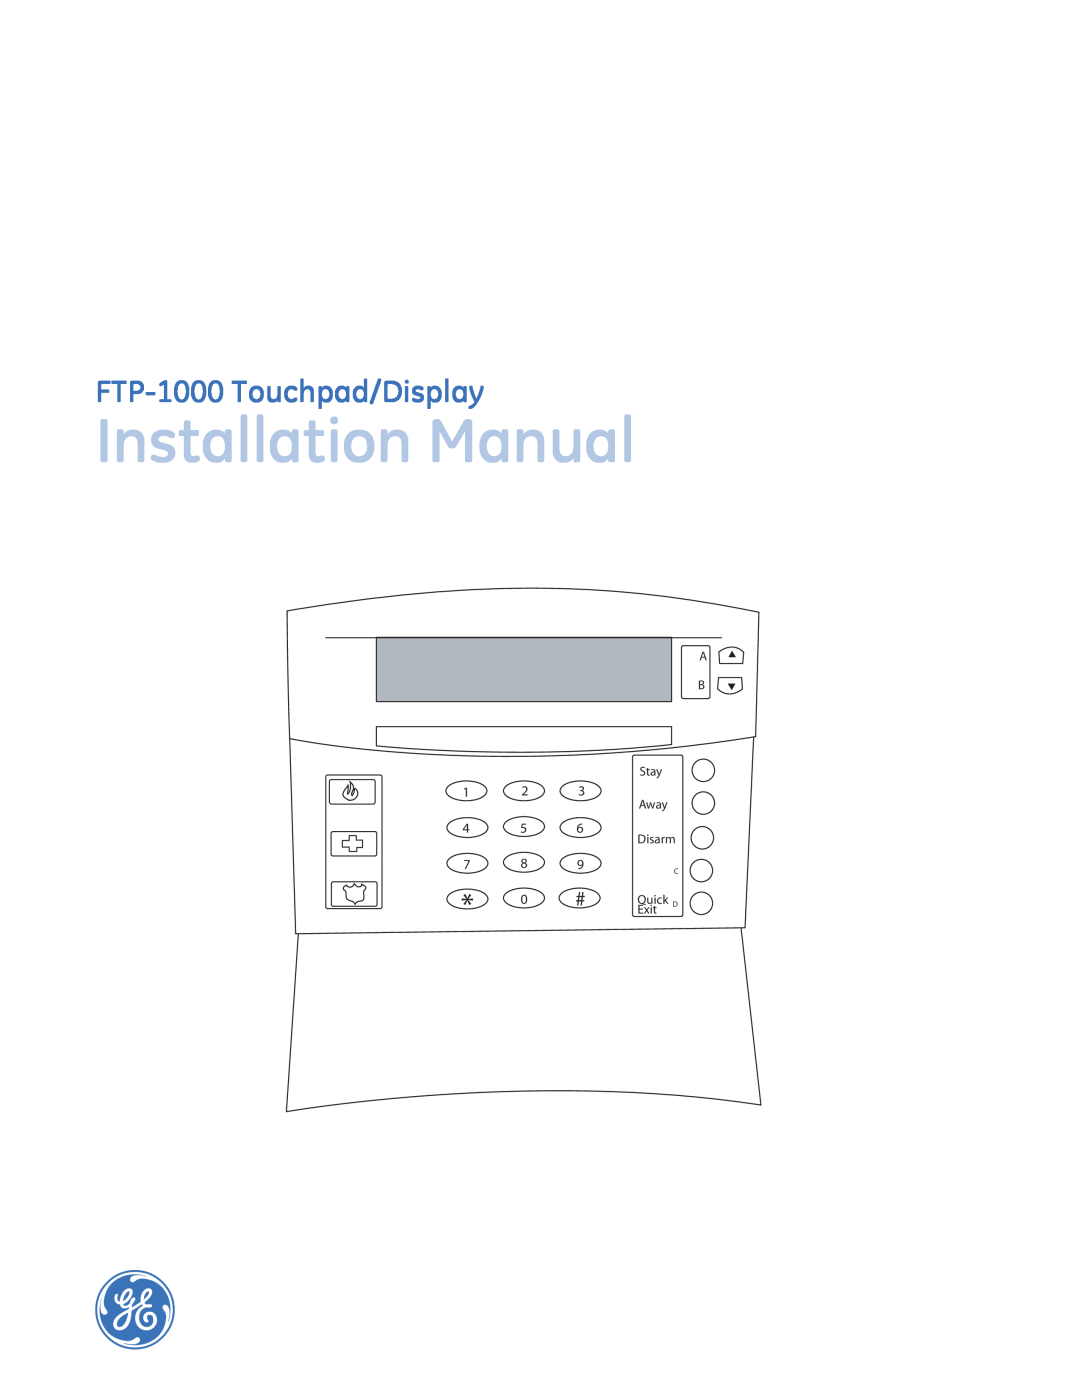 GE installation manual FTP-1000Touchpad/Display, Installation Manual, A B Stay, Away, Disarm, Quick, Exit 